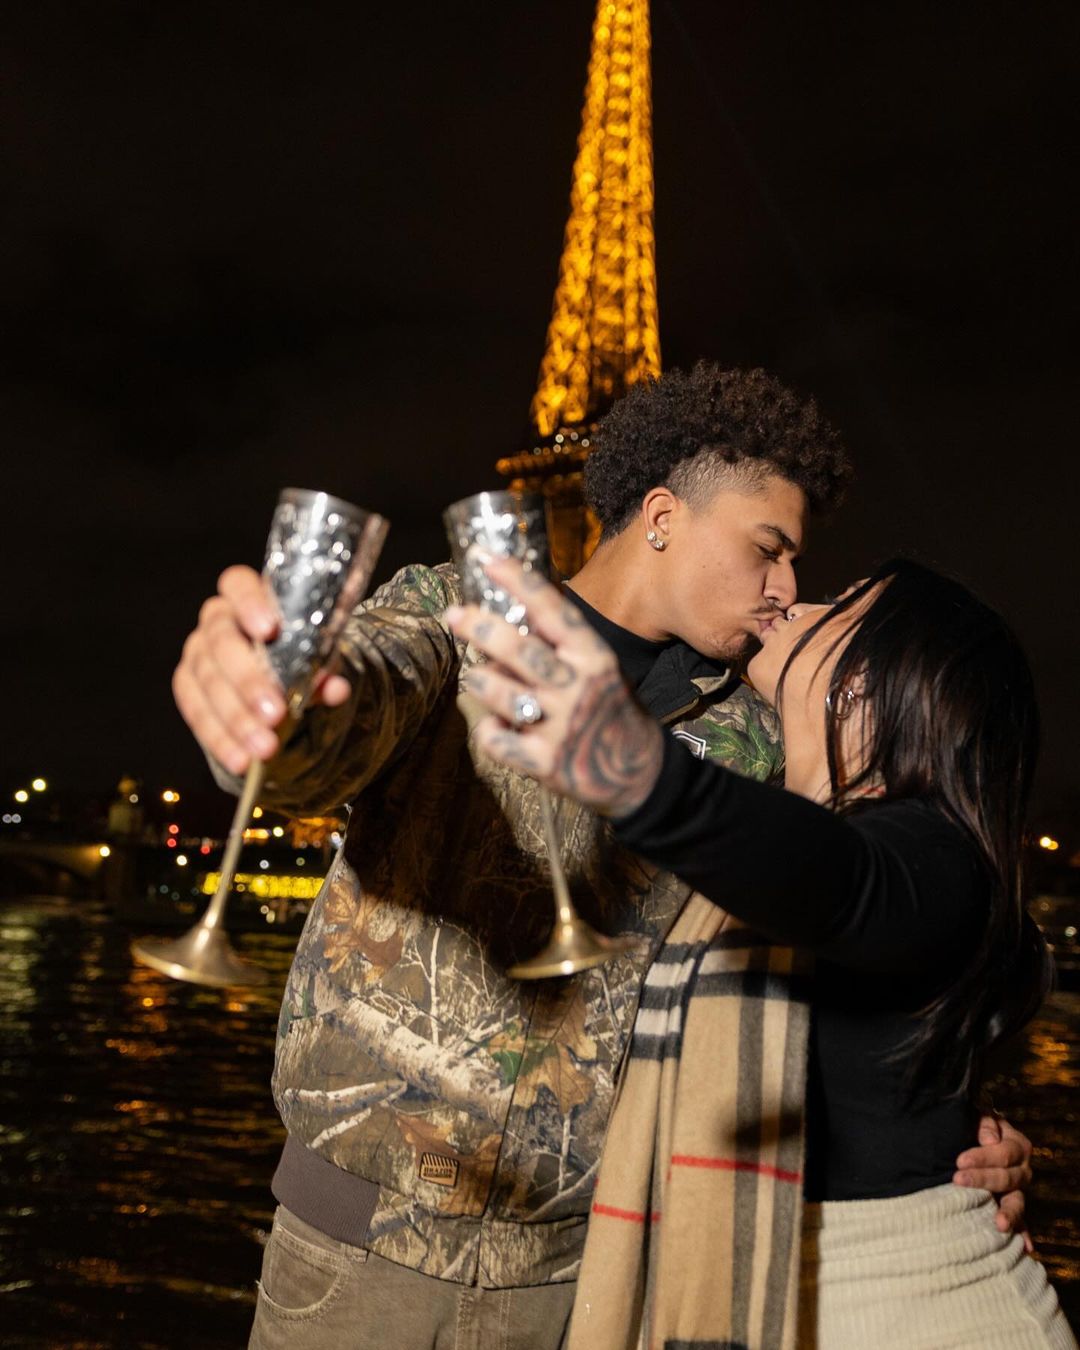 Danielle Cohn and her now-fiance, Brandon, kiss in front of the Eiffel Tower after their engagement